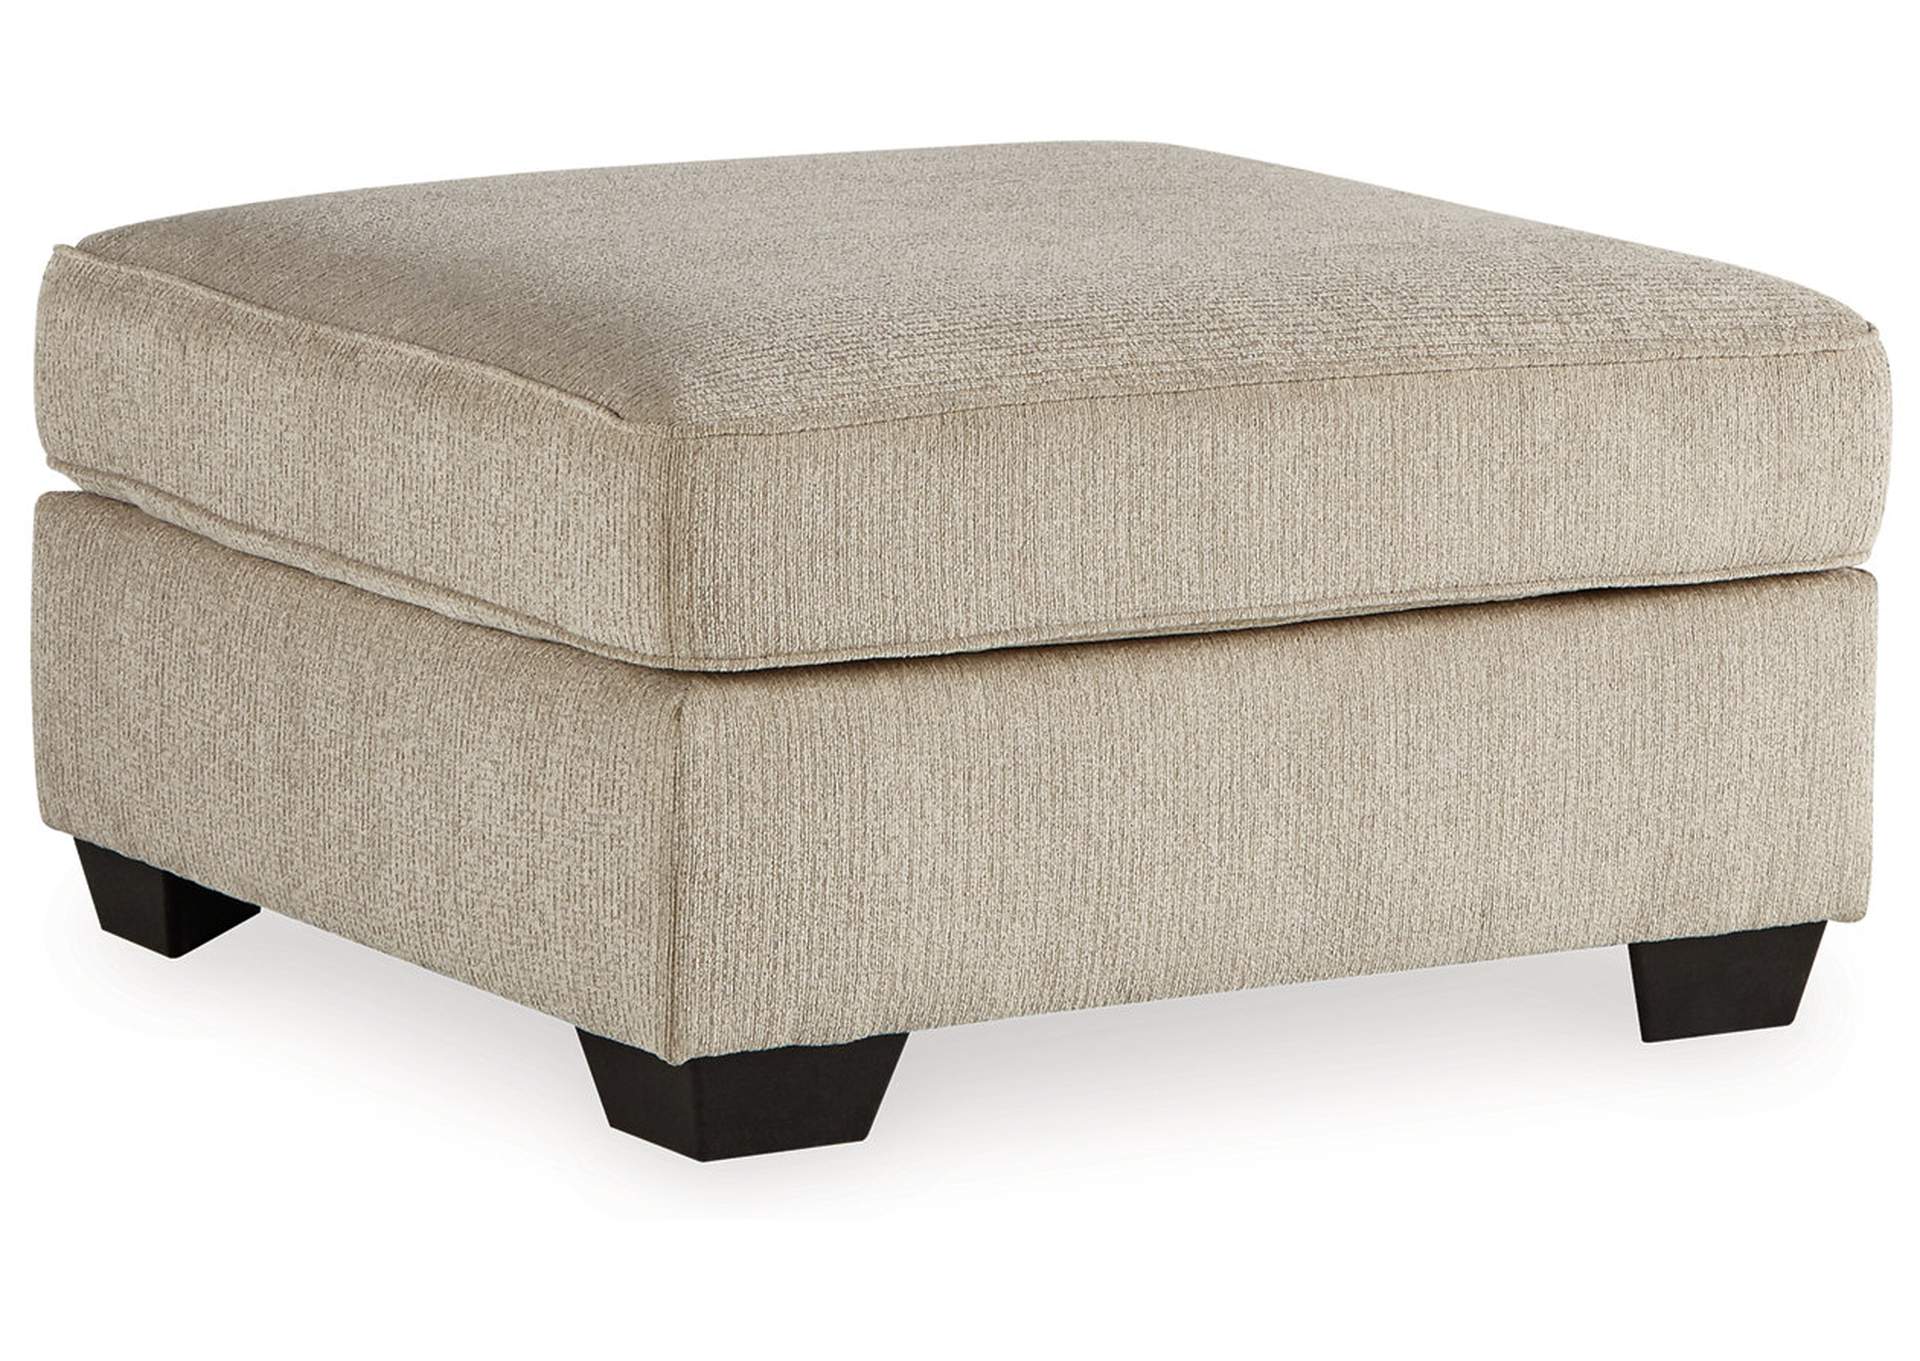 Decelle Oversized Accent Ottoman,Signature Design By Ashley